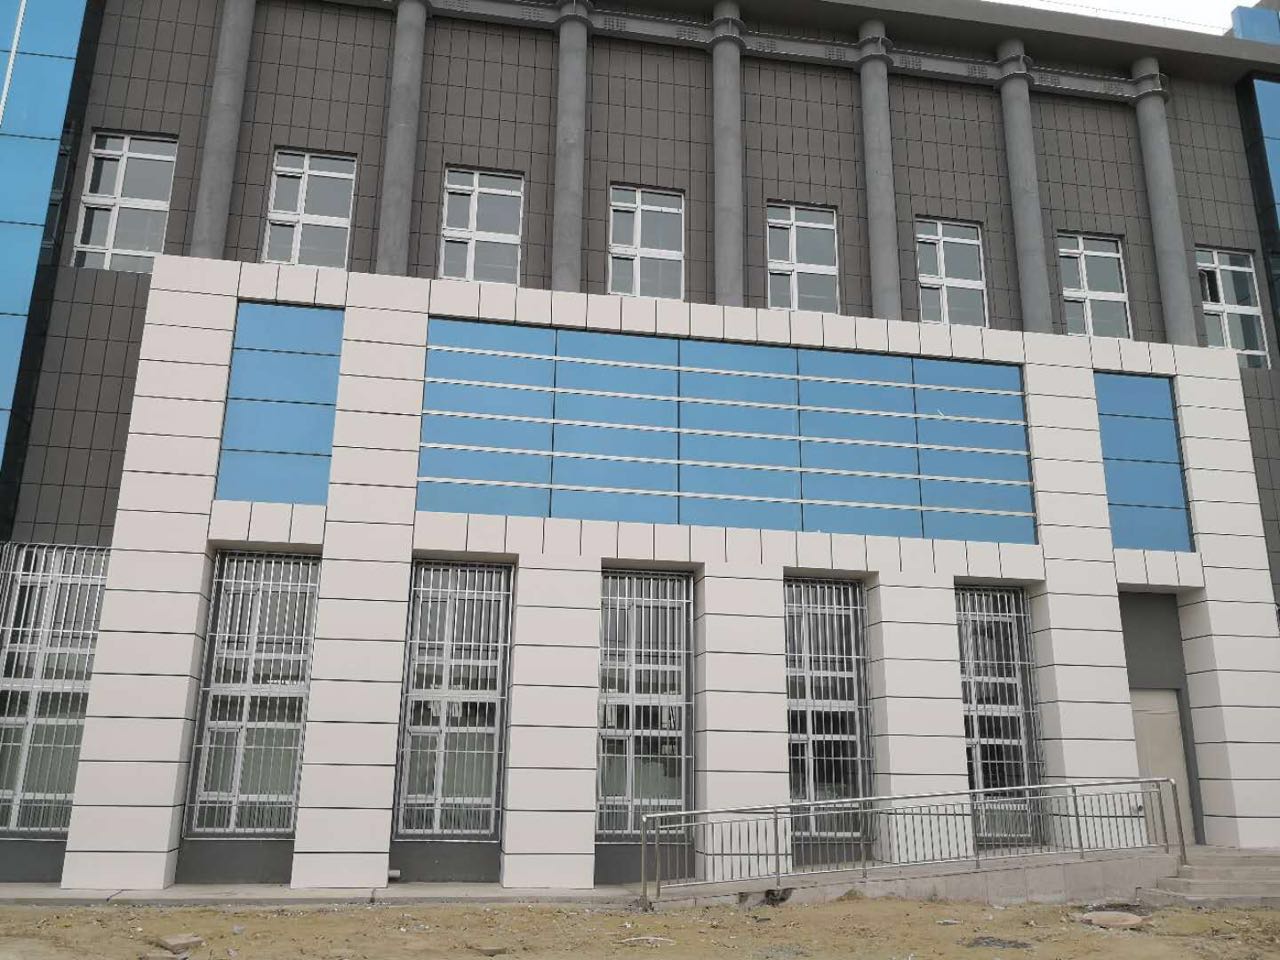 Xinjiang Second Division 31st Regiment Comprehensive Activity Center Construction Project